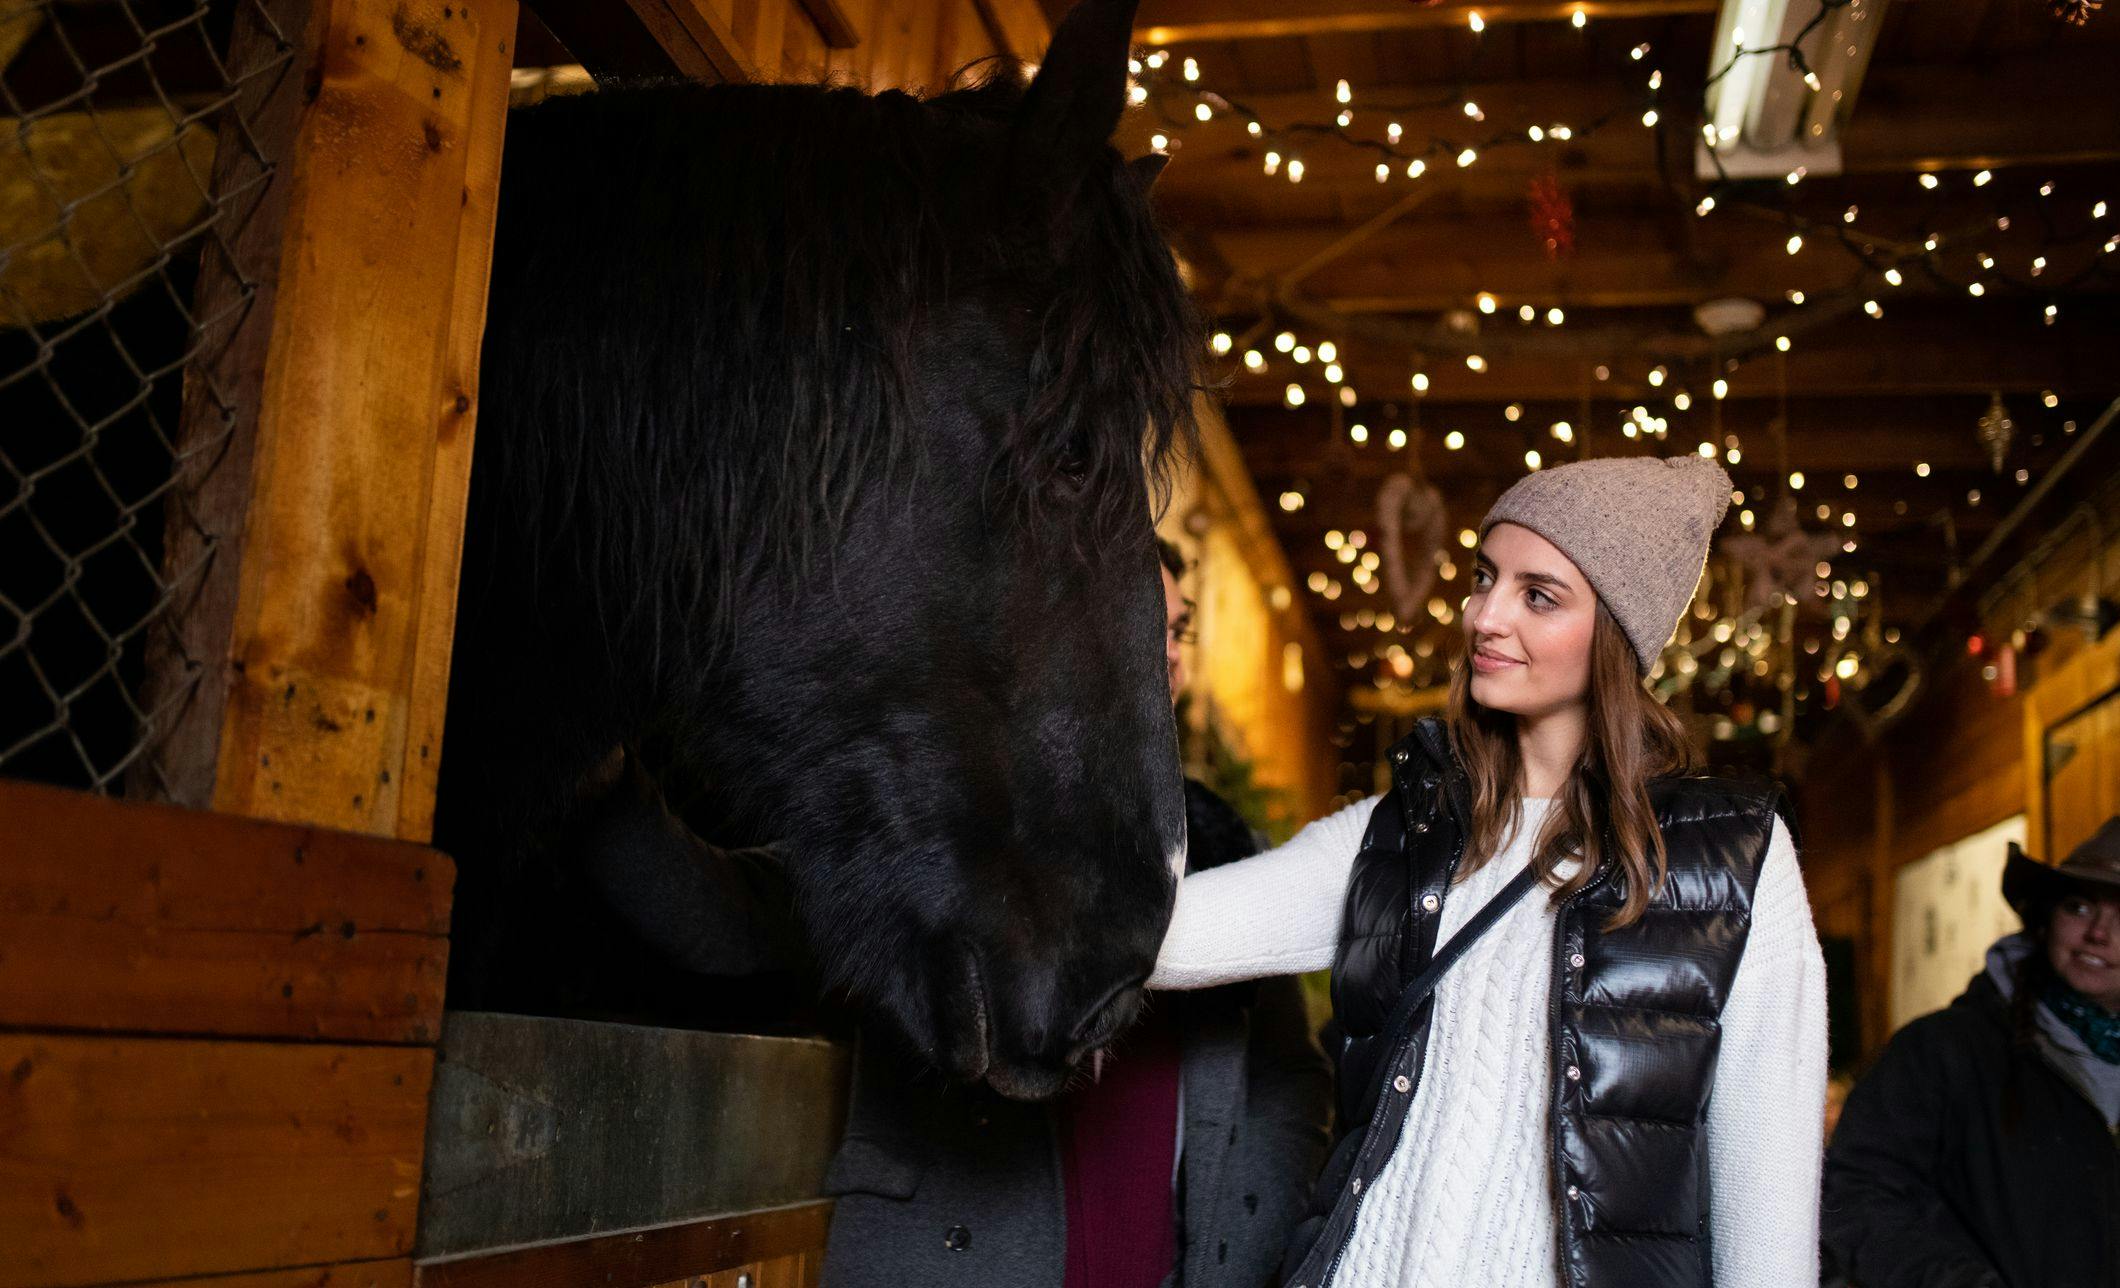 A woman pets a horse at Warner Stables in Banff during the Banff Christmas Market.